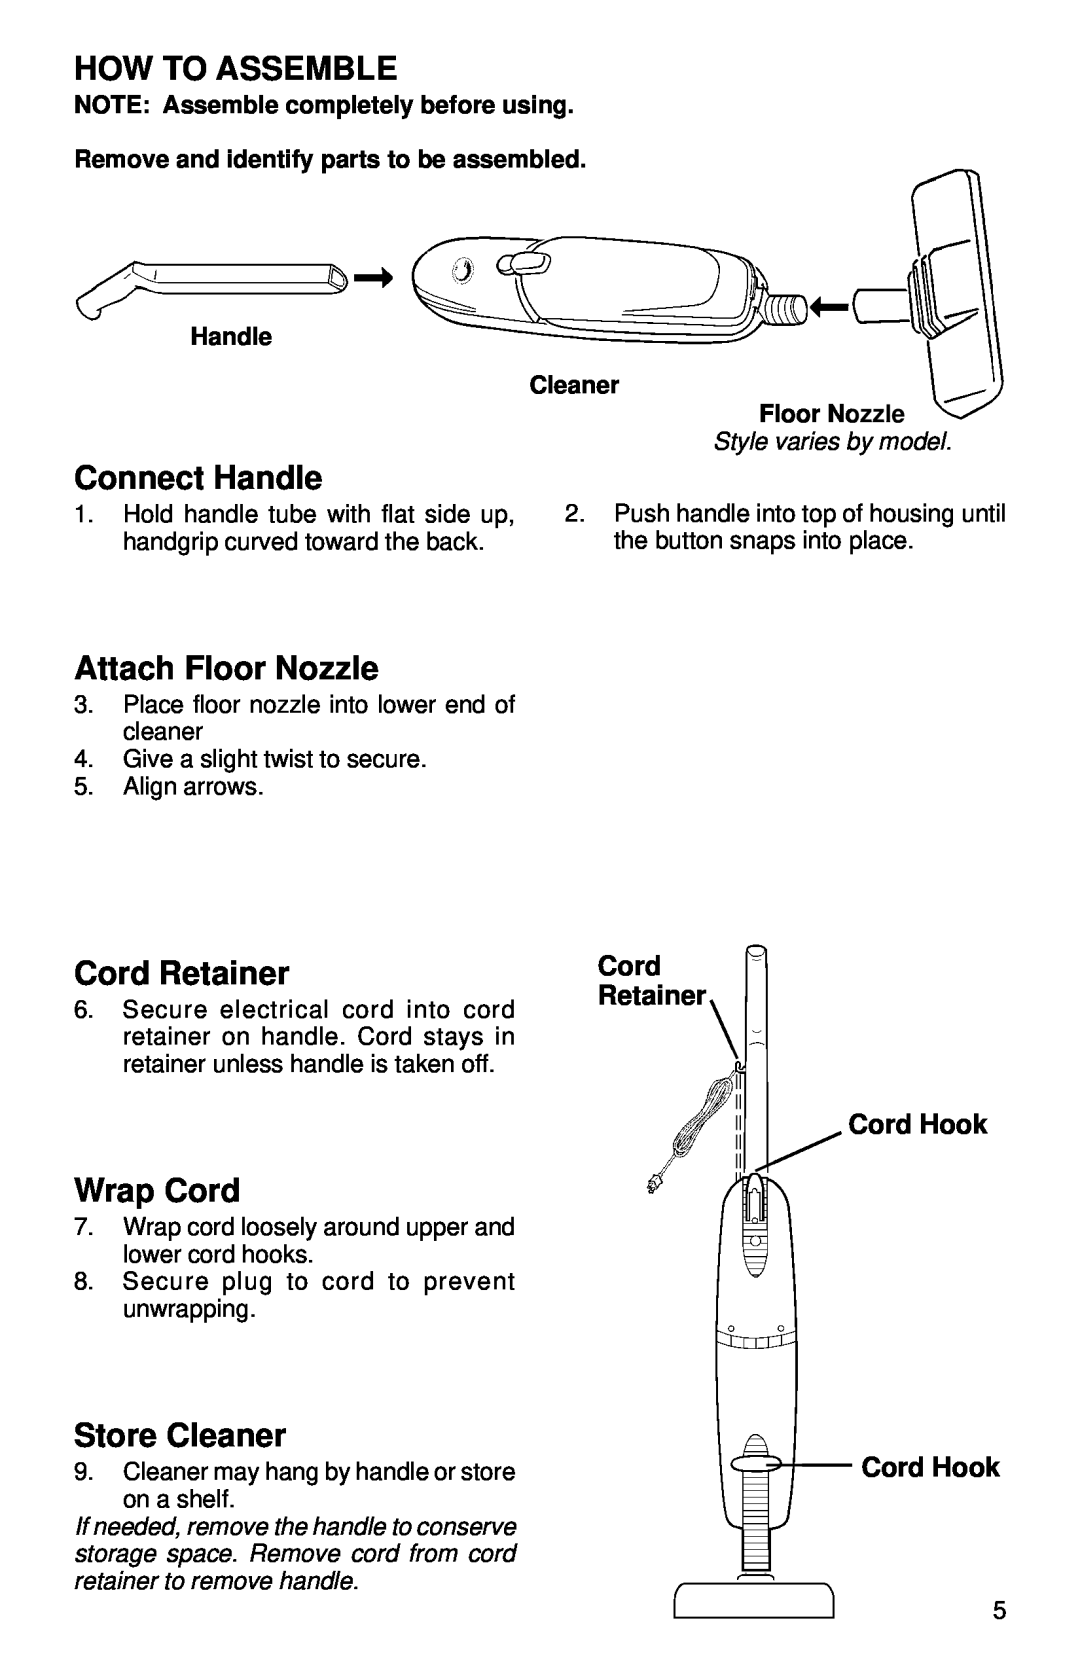 Eureka 200 Series warranty How To Assemble, Connect Handle, Attach Floor Nozzle, Cord Retainer, Wrap Cord, Store Cleaner 